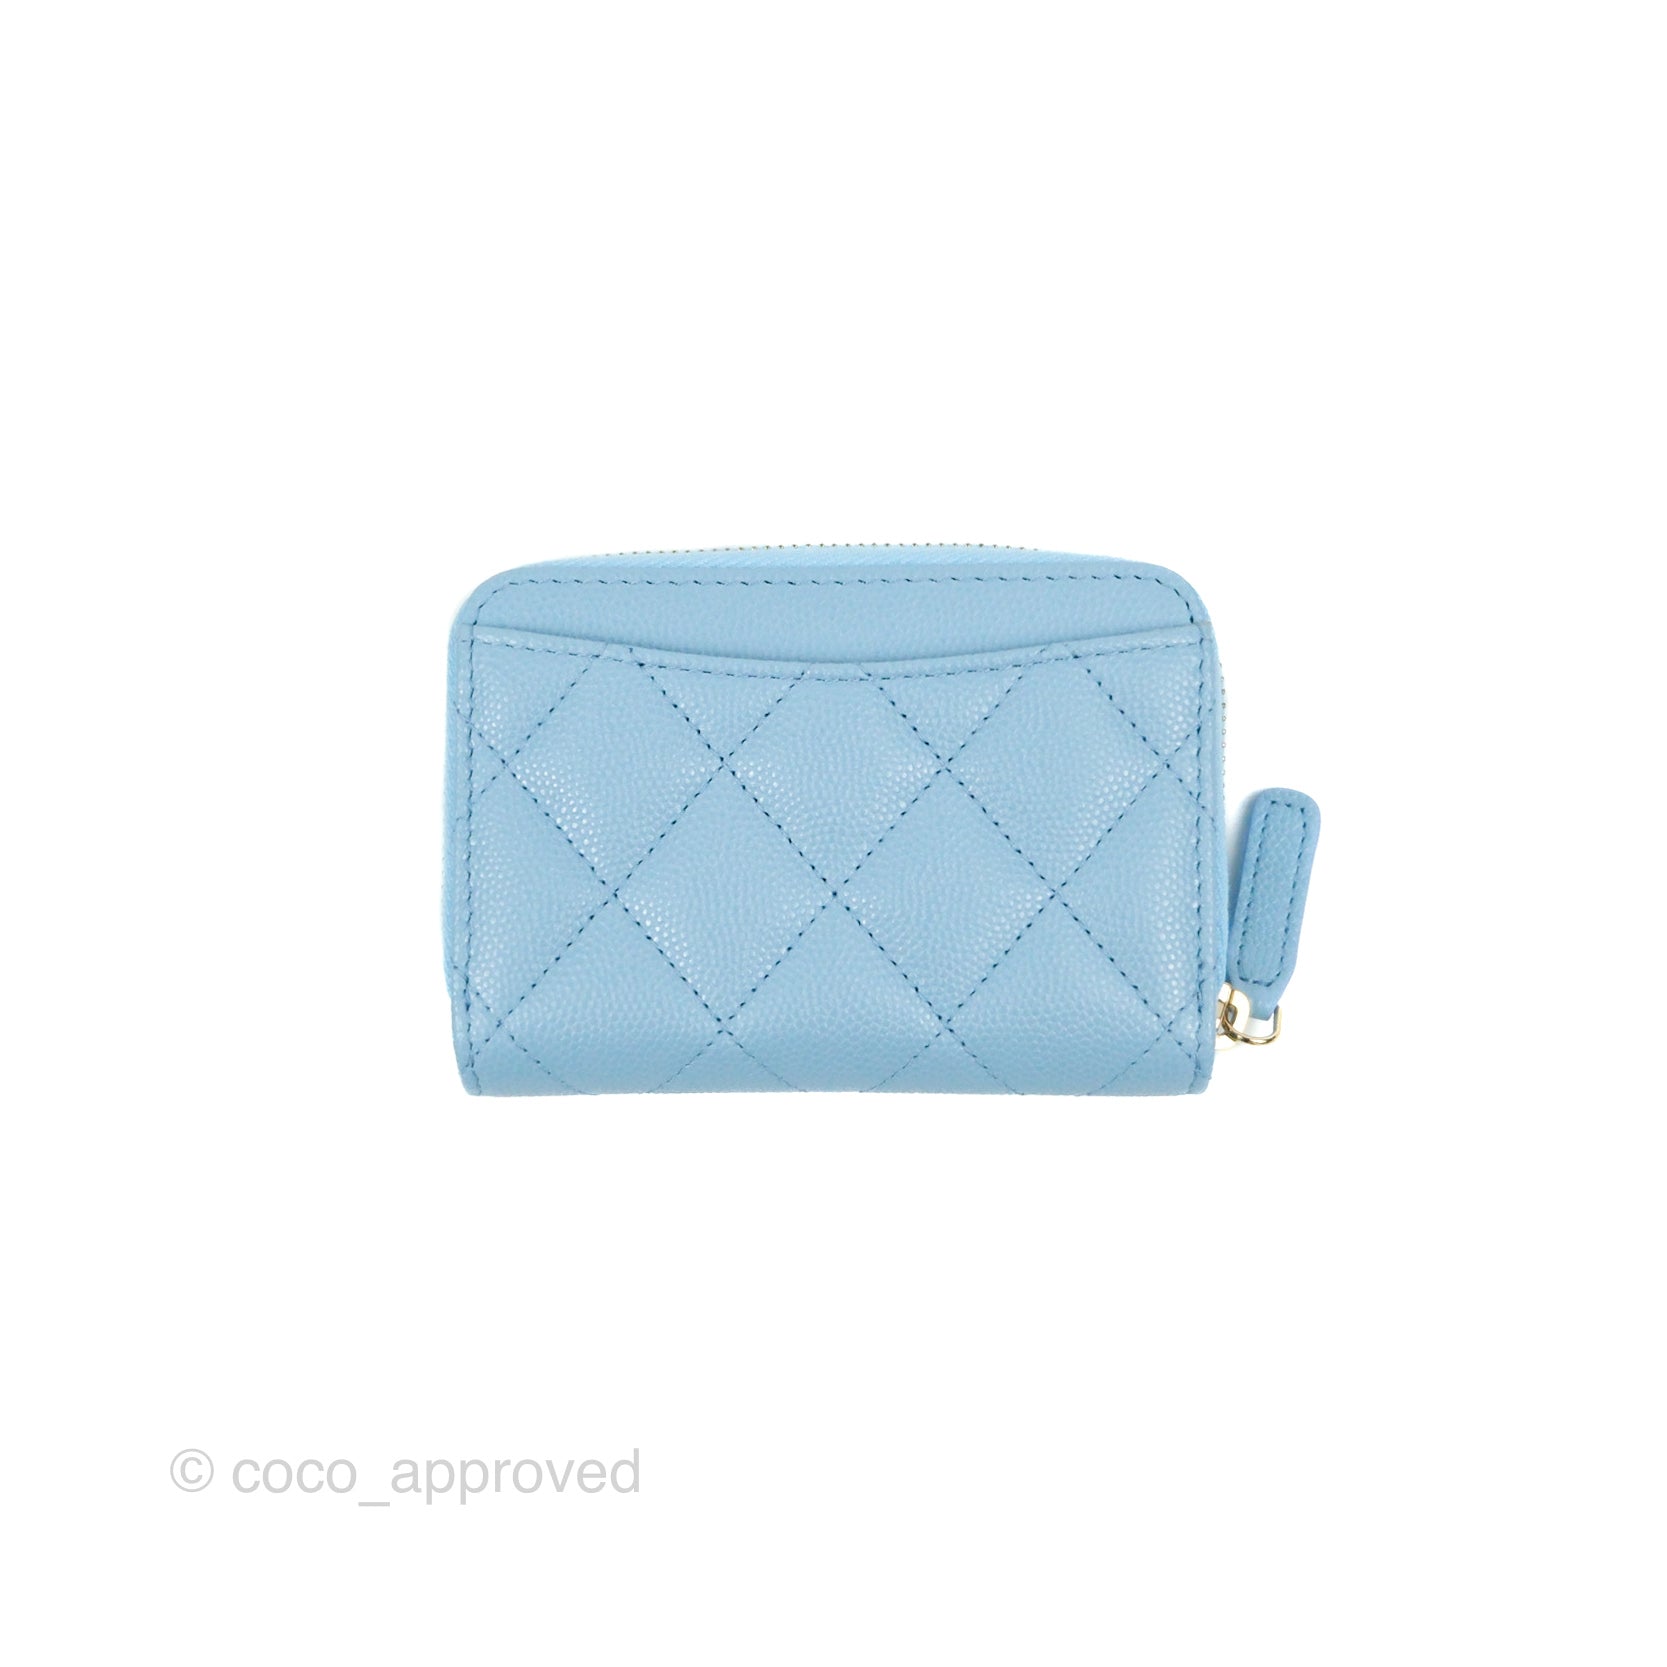 CHANEL, Bags, Chanel Zip Around Wallet Blue